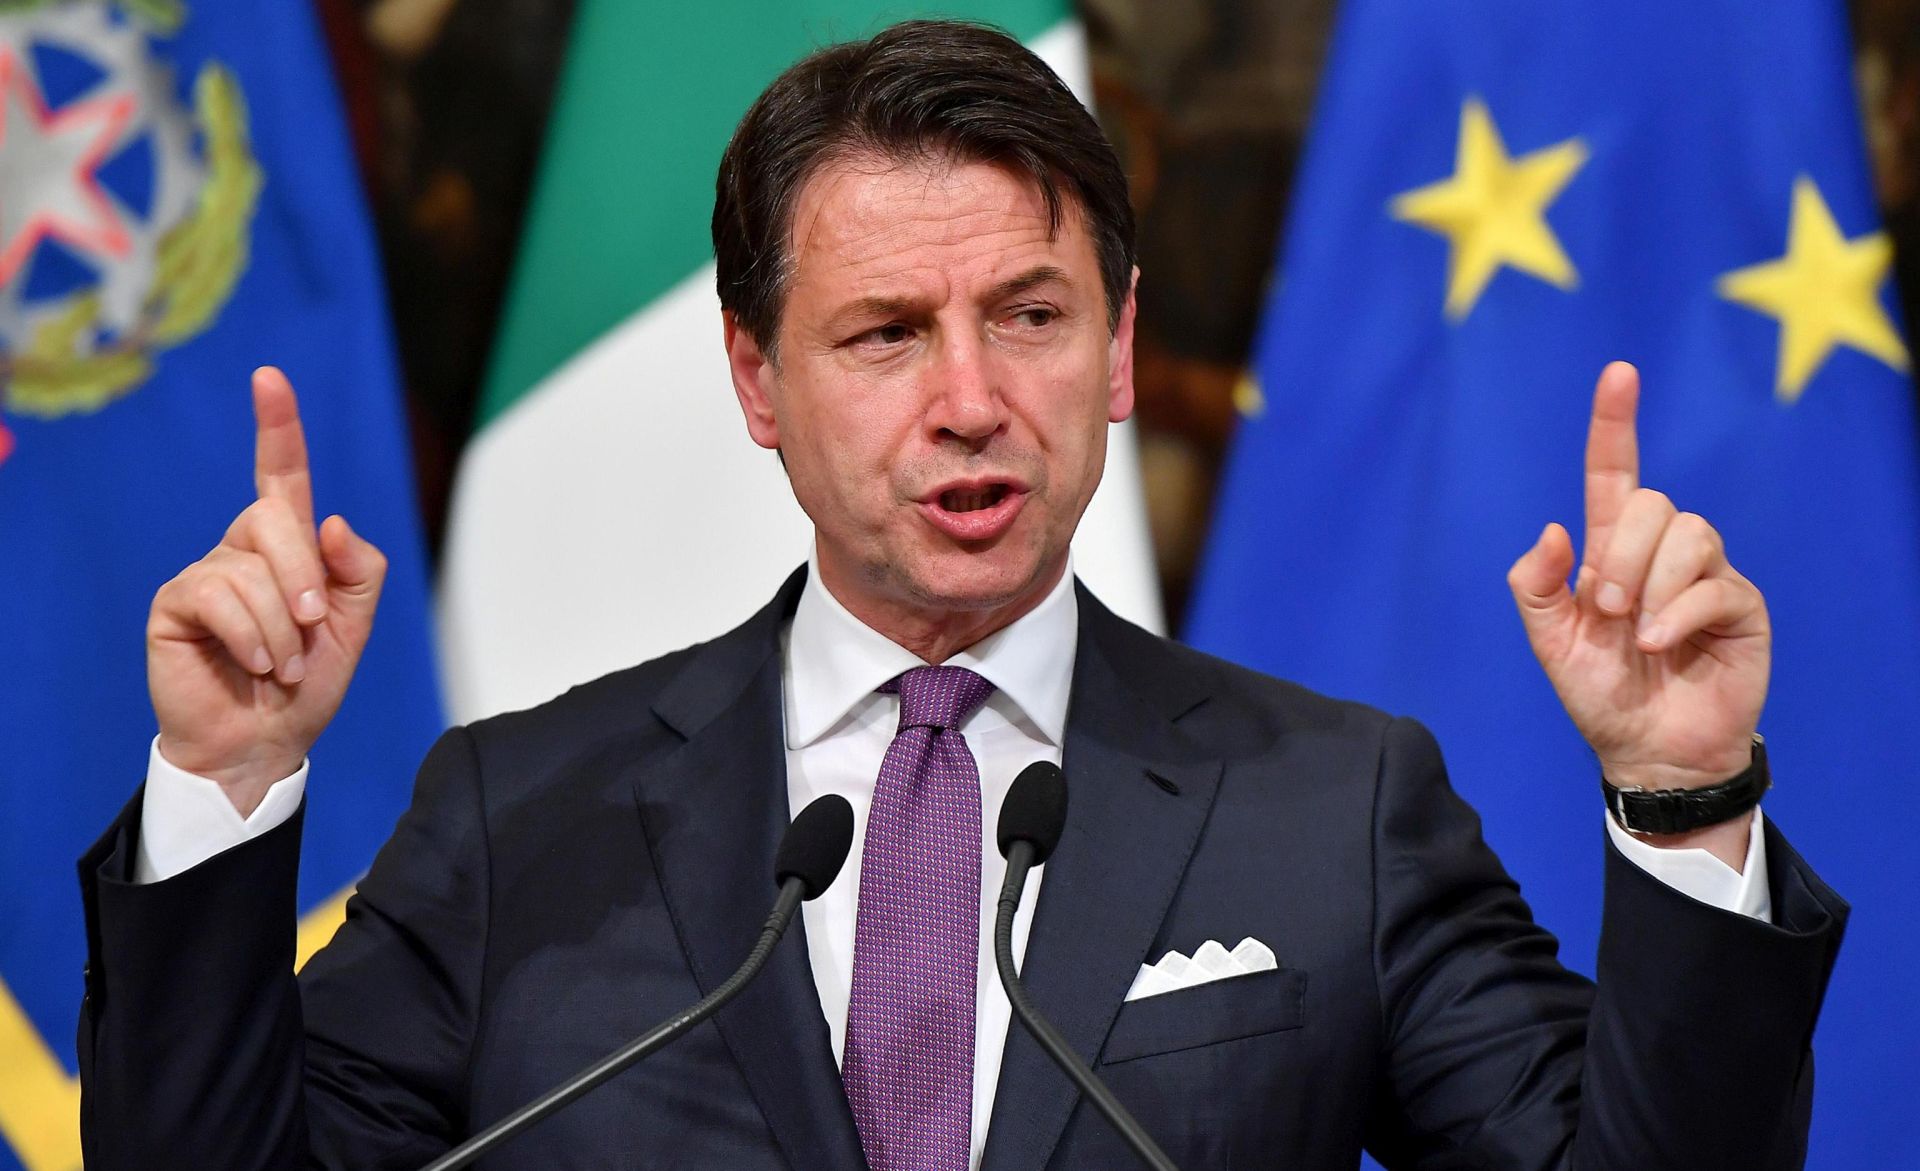 epa07623187 epa07623150 Italian Prime Minister, Giuseppe Conte, holds a press conference at Chili Palace in Rome, Italy, 03 June 2019. Italian media report Conte was expected to make an announcement related to ongoing tensions in the Italian coalition government 
and in particular related with the Five Star Movement and far-right party League.  EPA/ETTORE FERRARI  EPA-EFE/ETTORE FERRARI